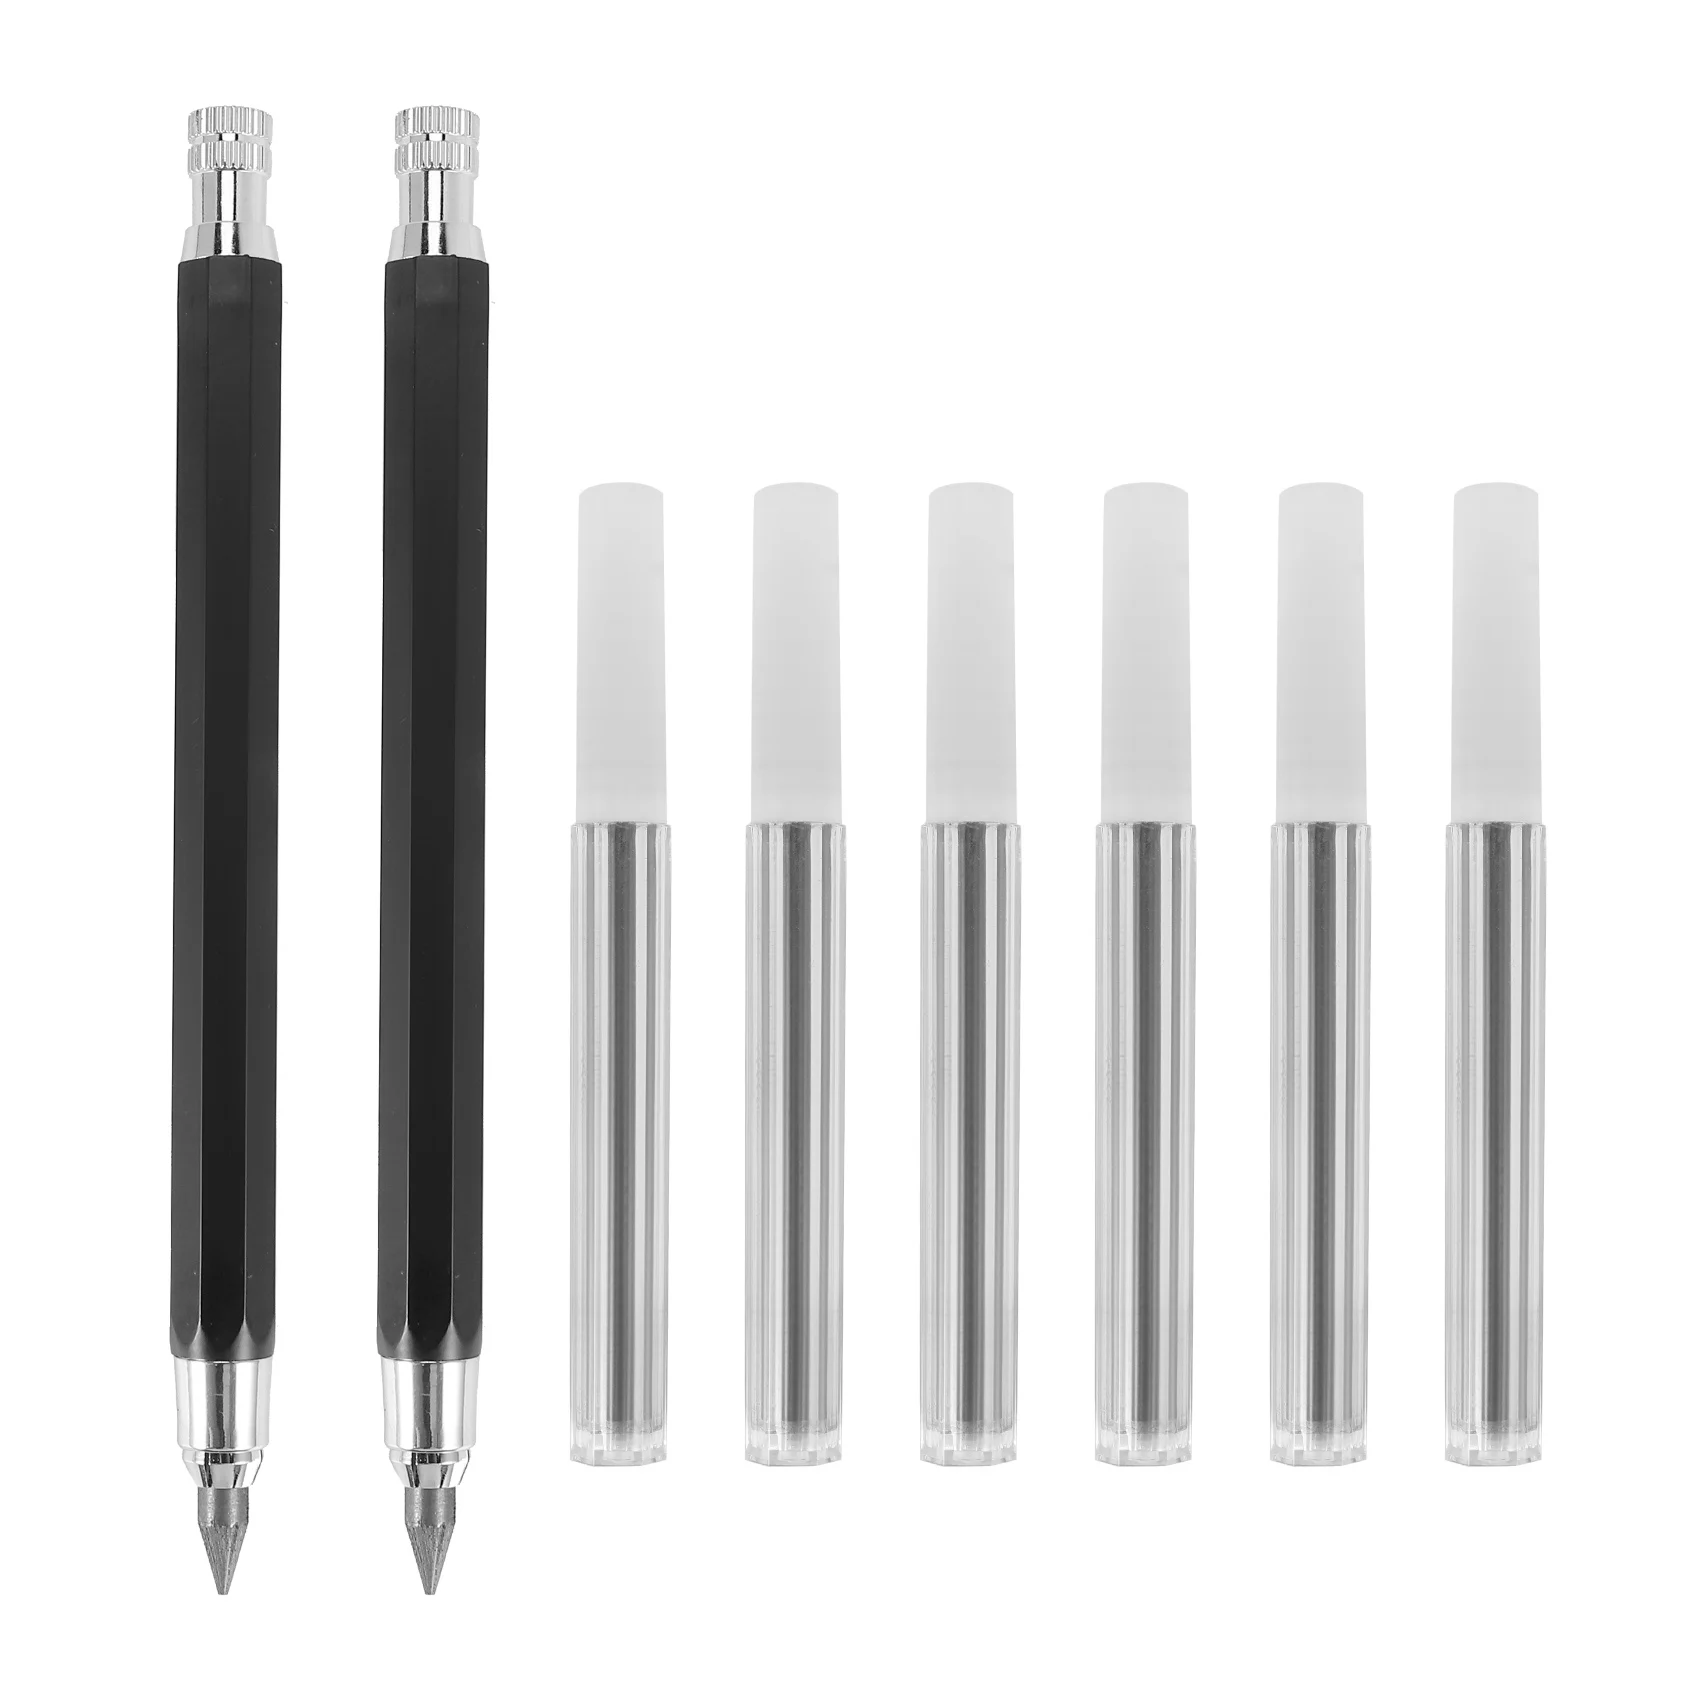 

2 Pcs 5.6mm Lead Holder Automatic Mechanical Pencil with Sharpener and Charcoal Lead Refill, 6Pcs Extra Lead Refills